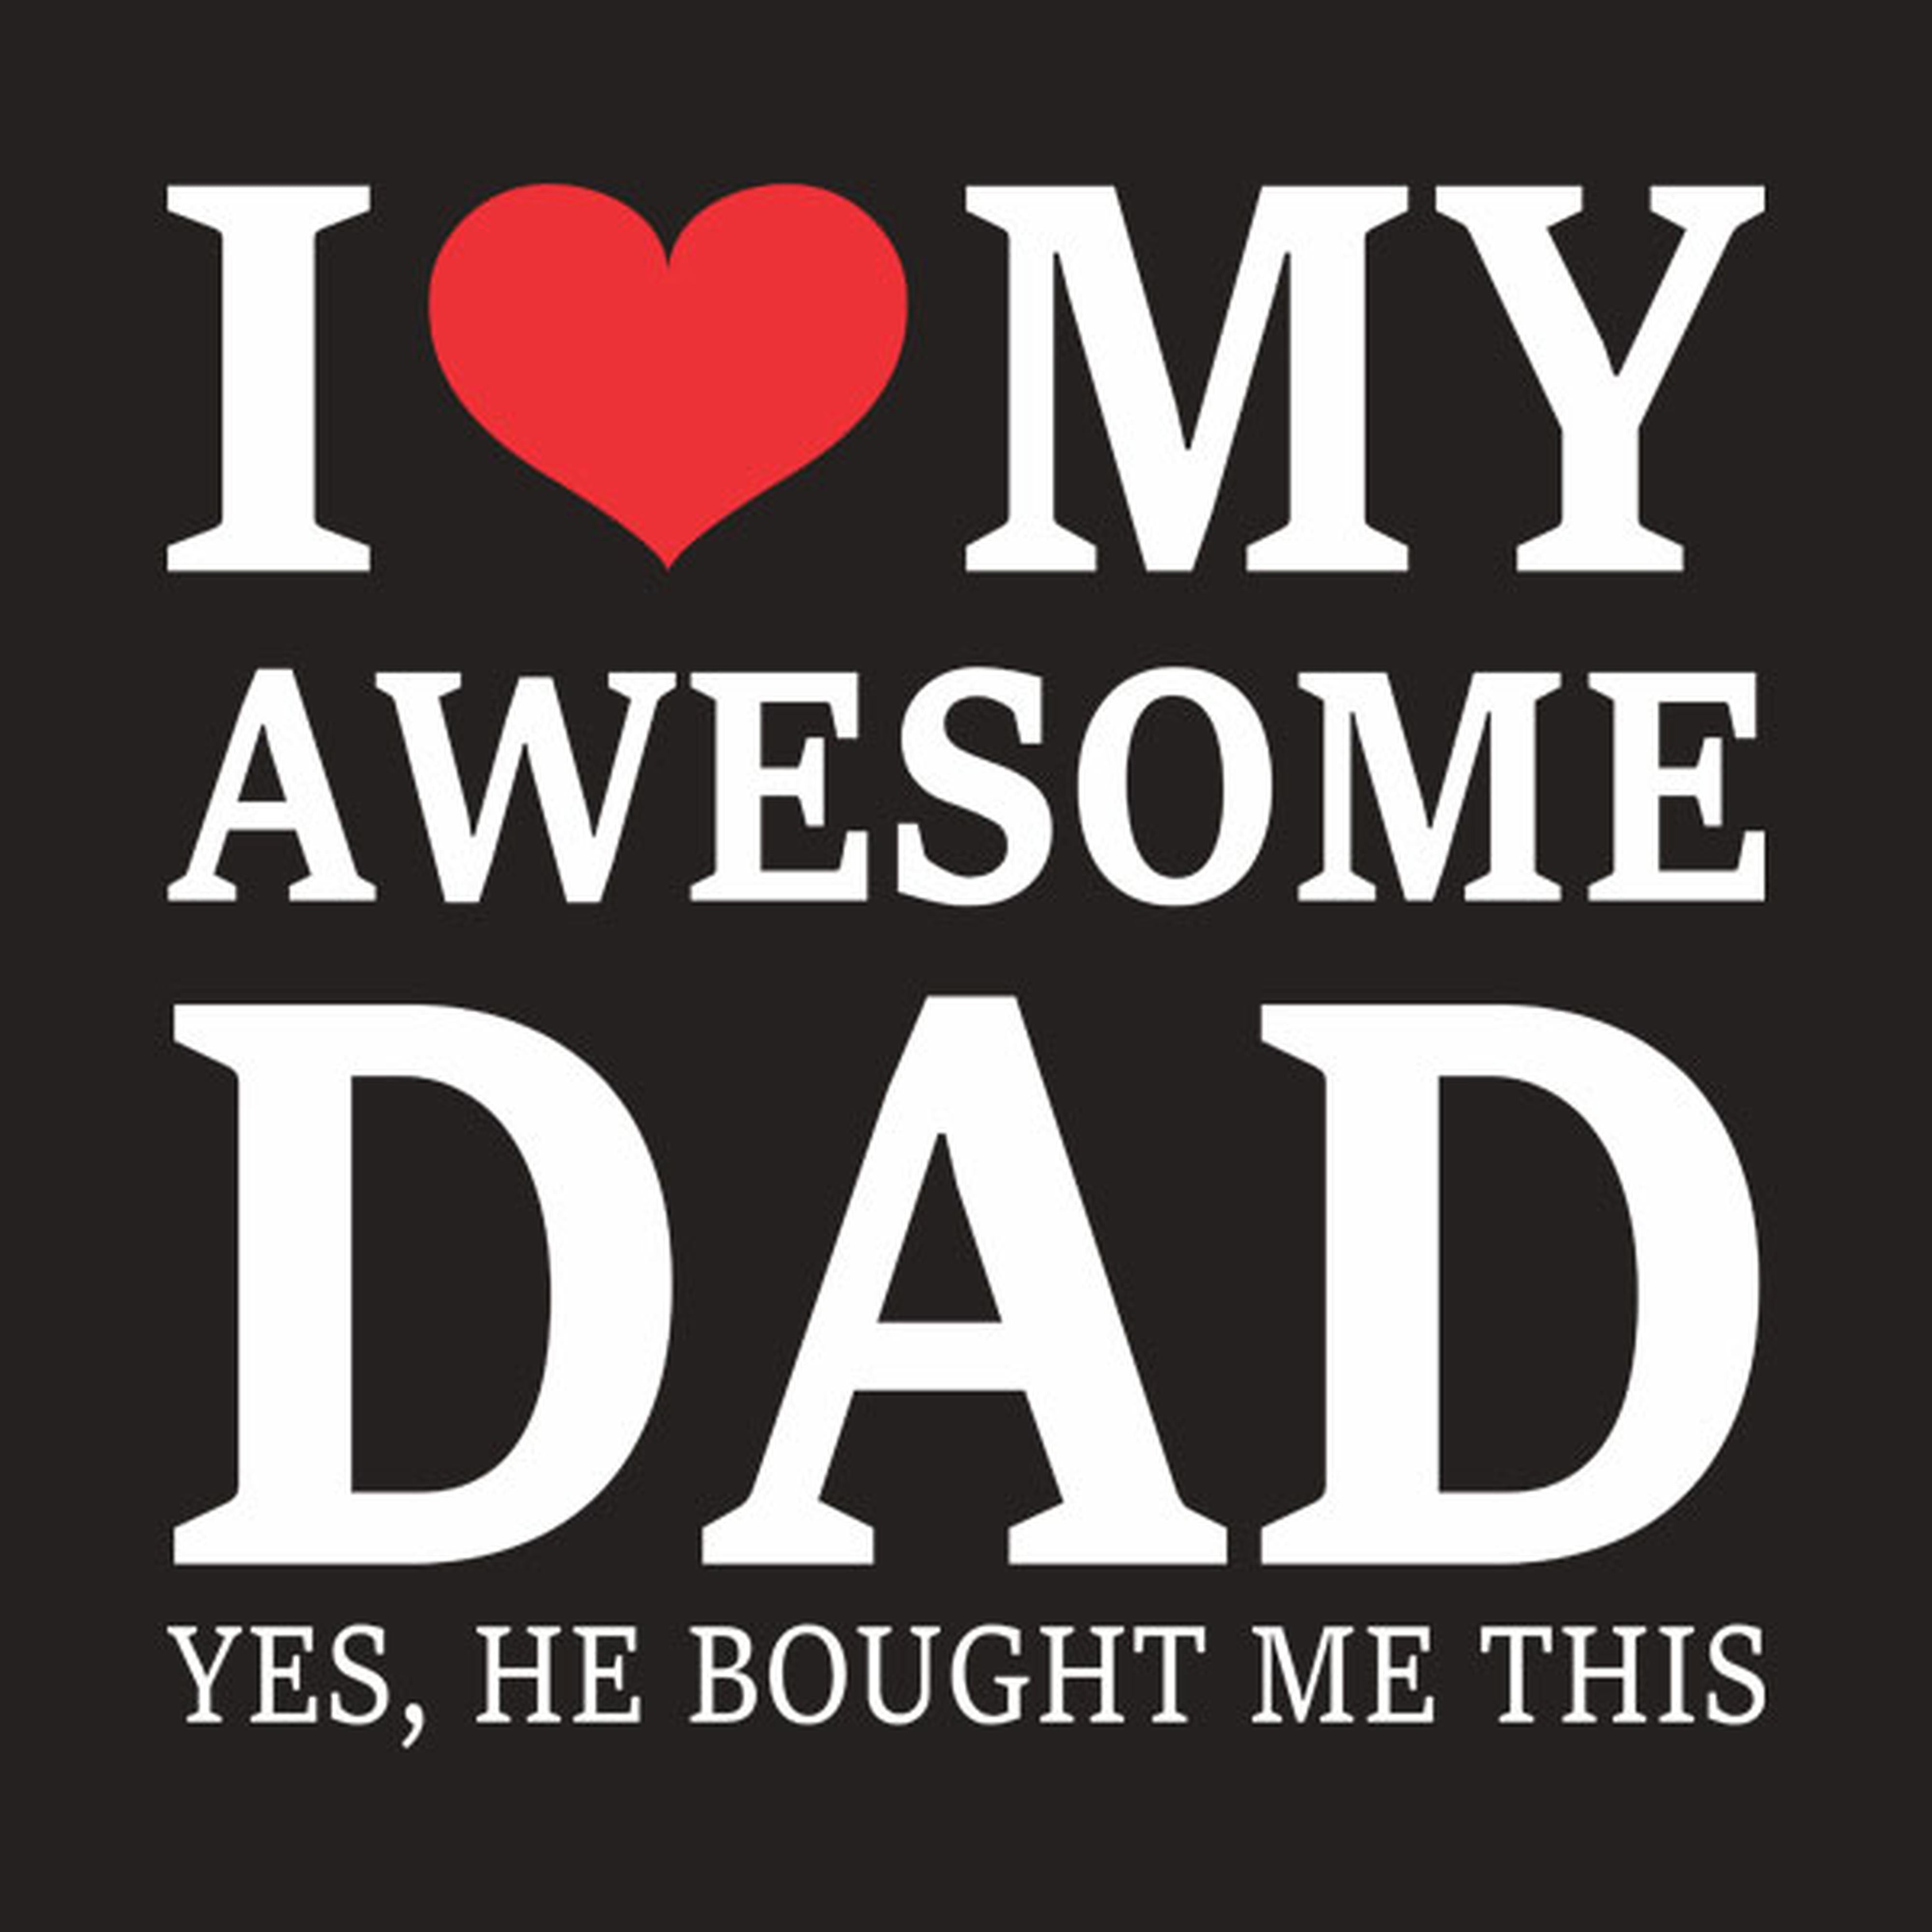 I love my awesome dad - T-shirt